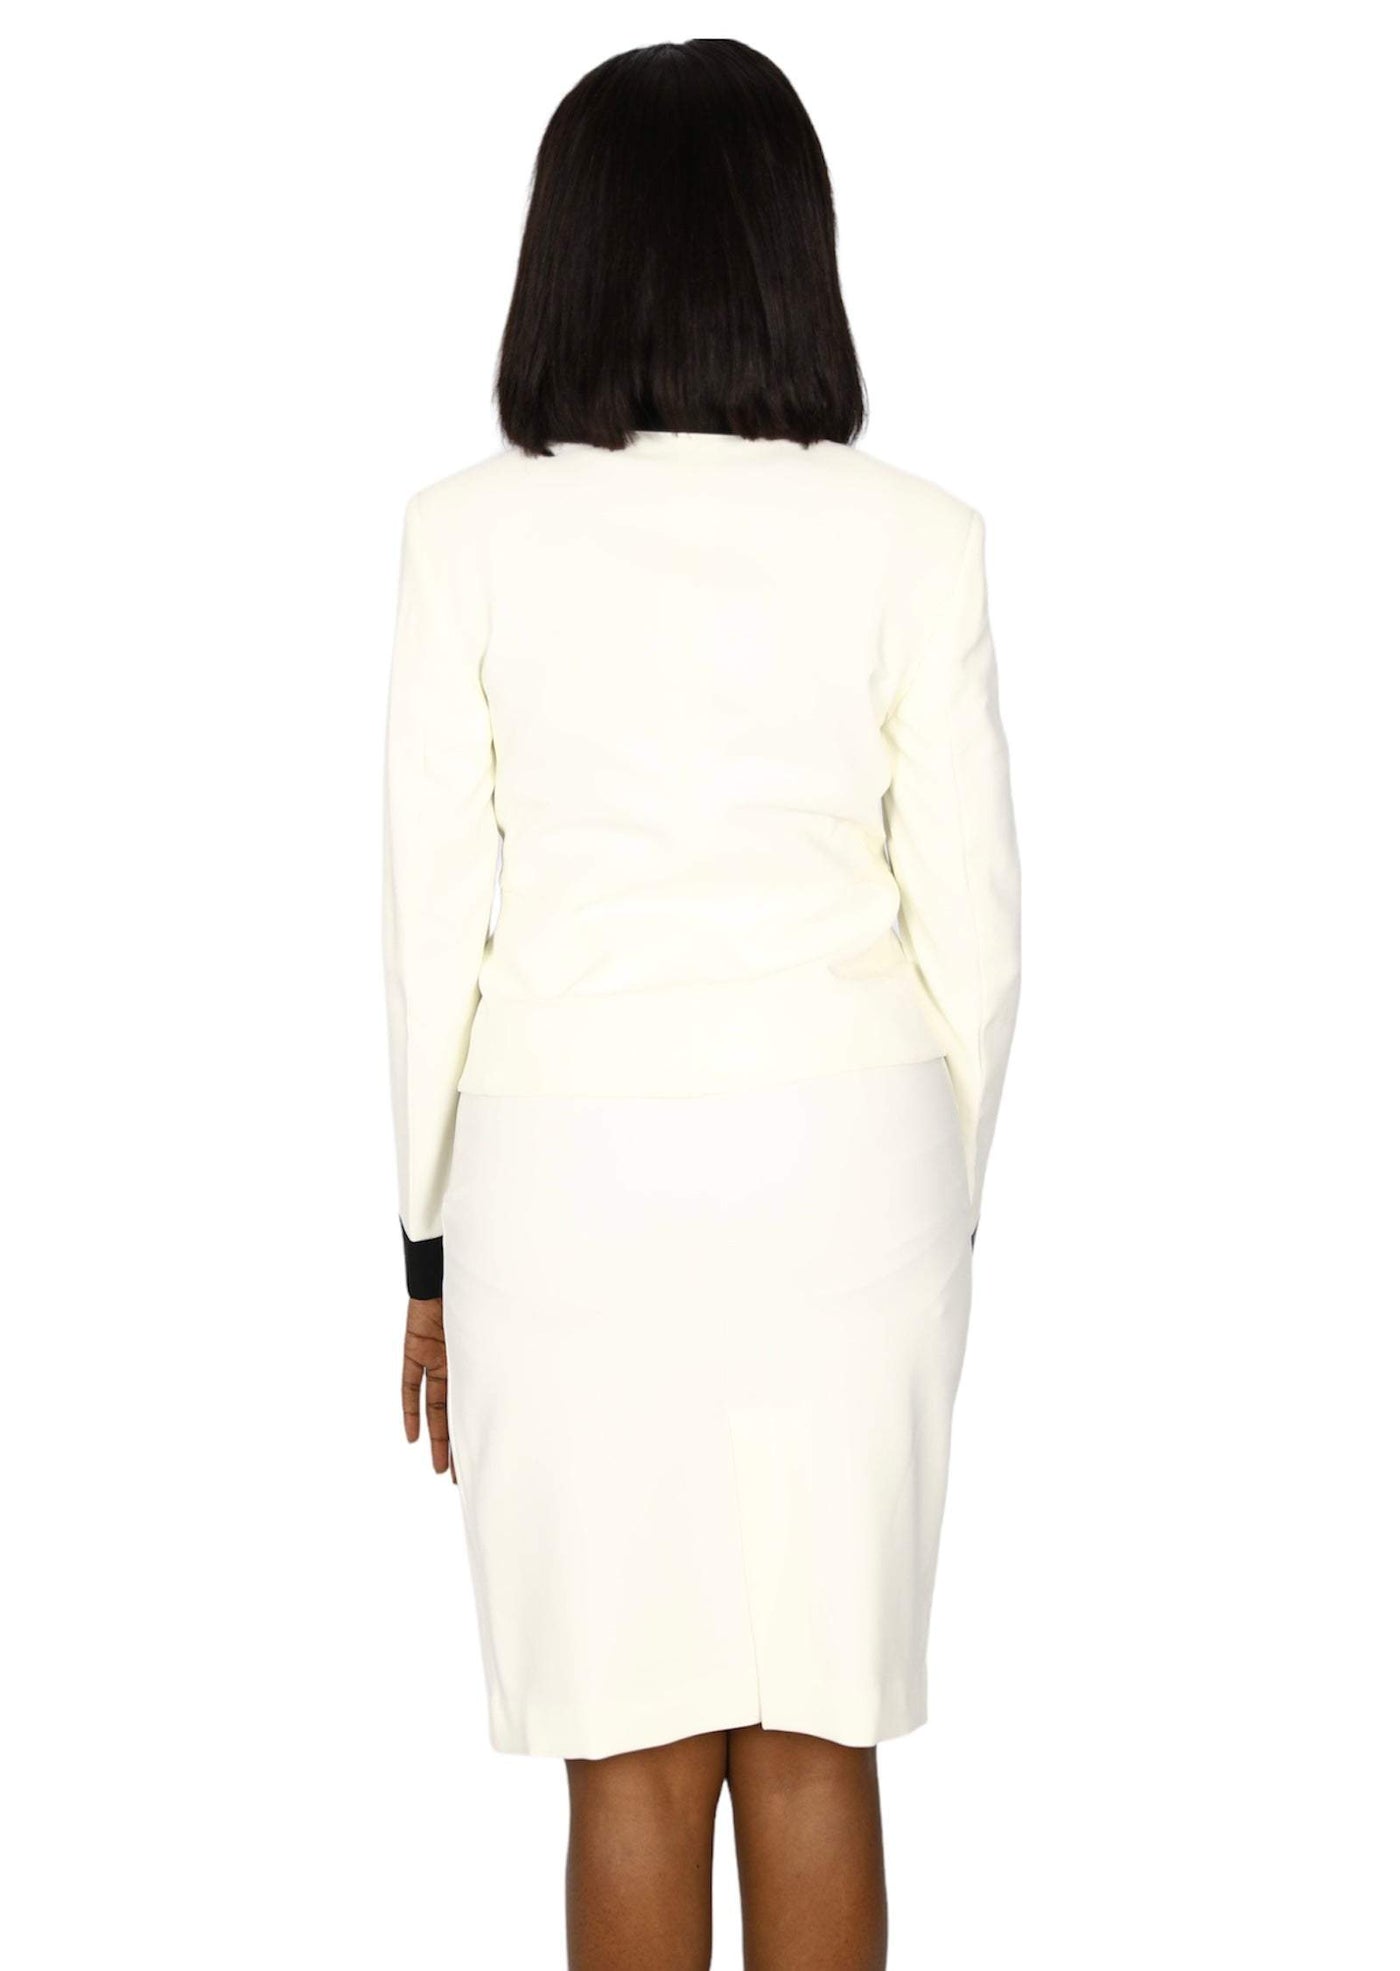 African Office White and Black Skirt Suit-danddclothing-AFRICAN WEAR FOR WOMEN,Ladies Suits